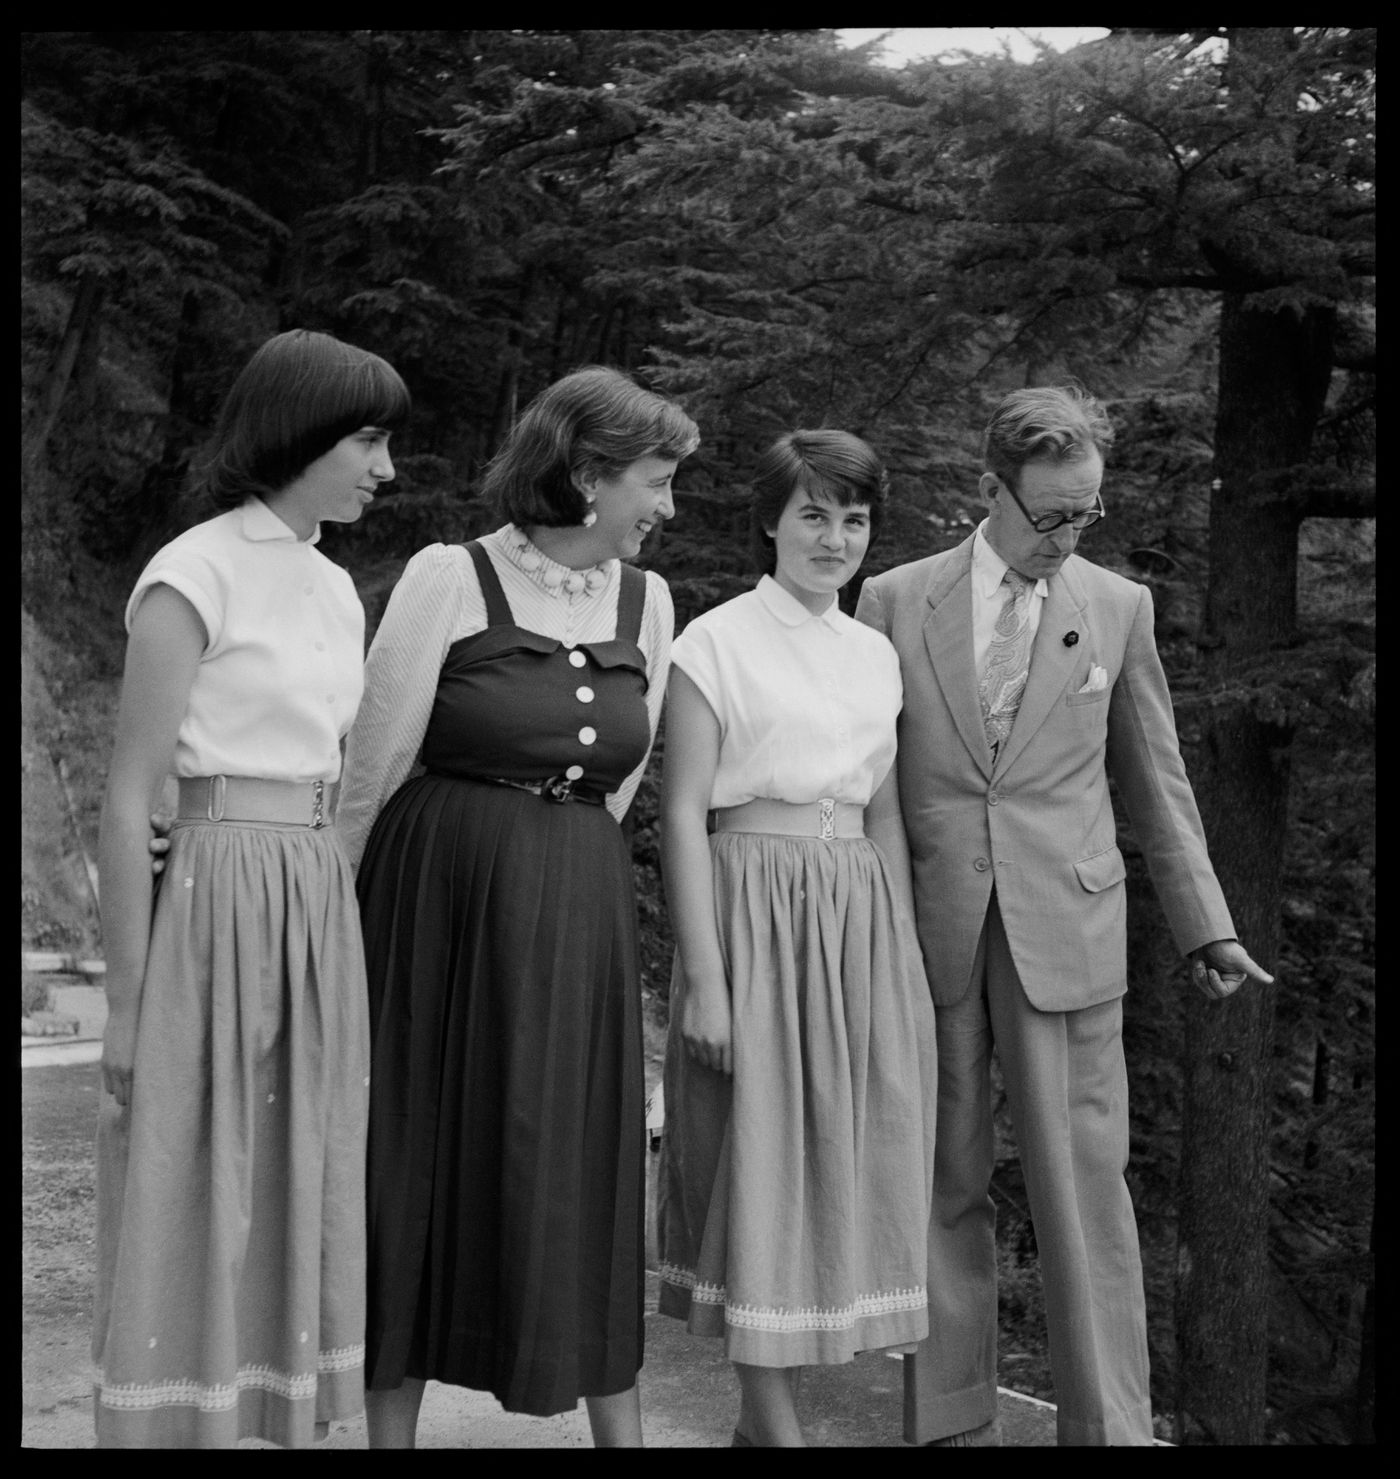 Jane Drew, Maxwell Fry and two unidentified women on the site of Chandigarh before the construction, India